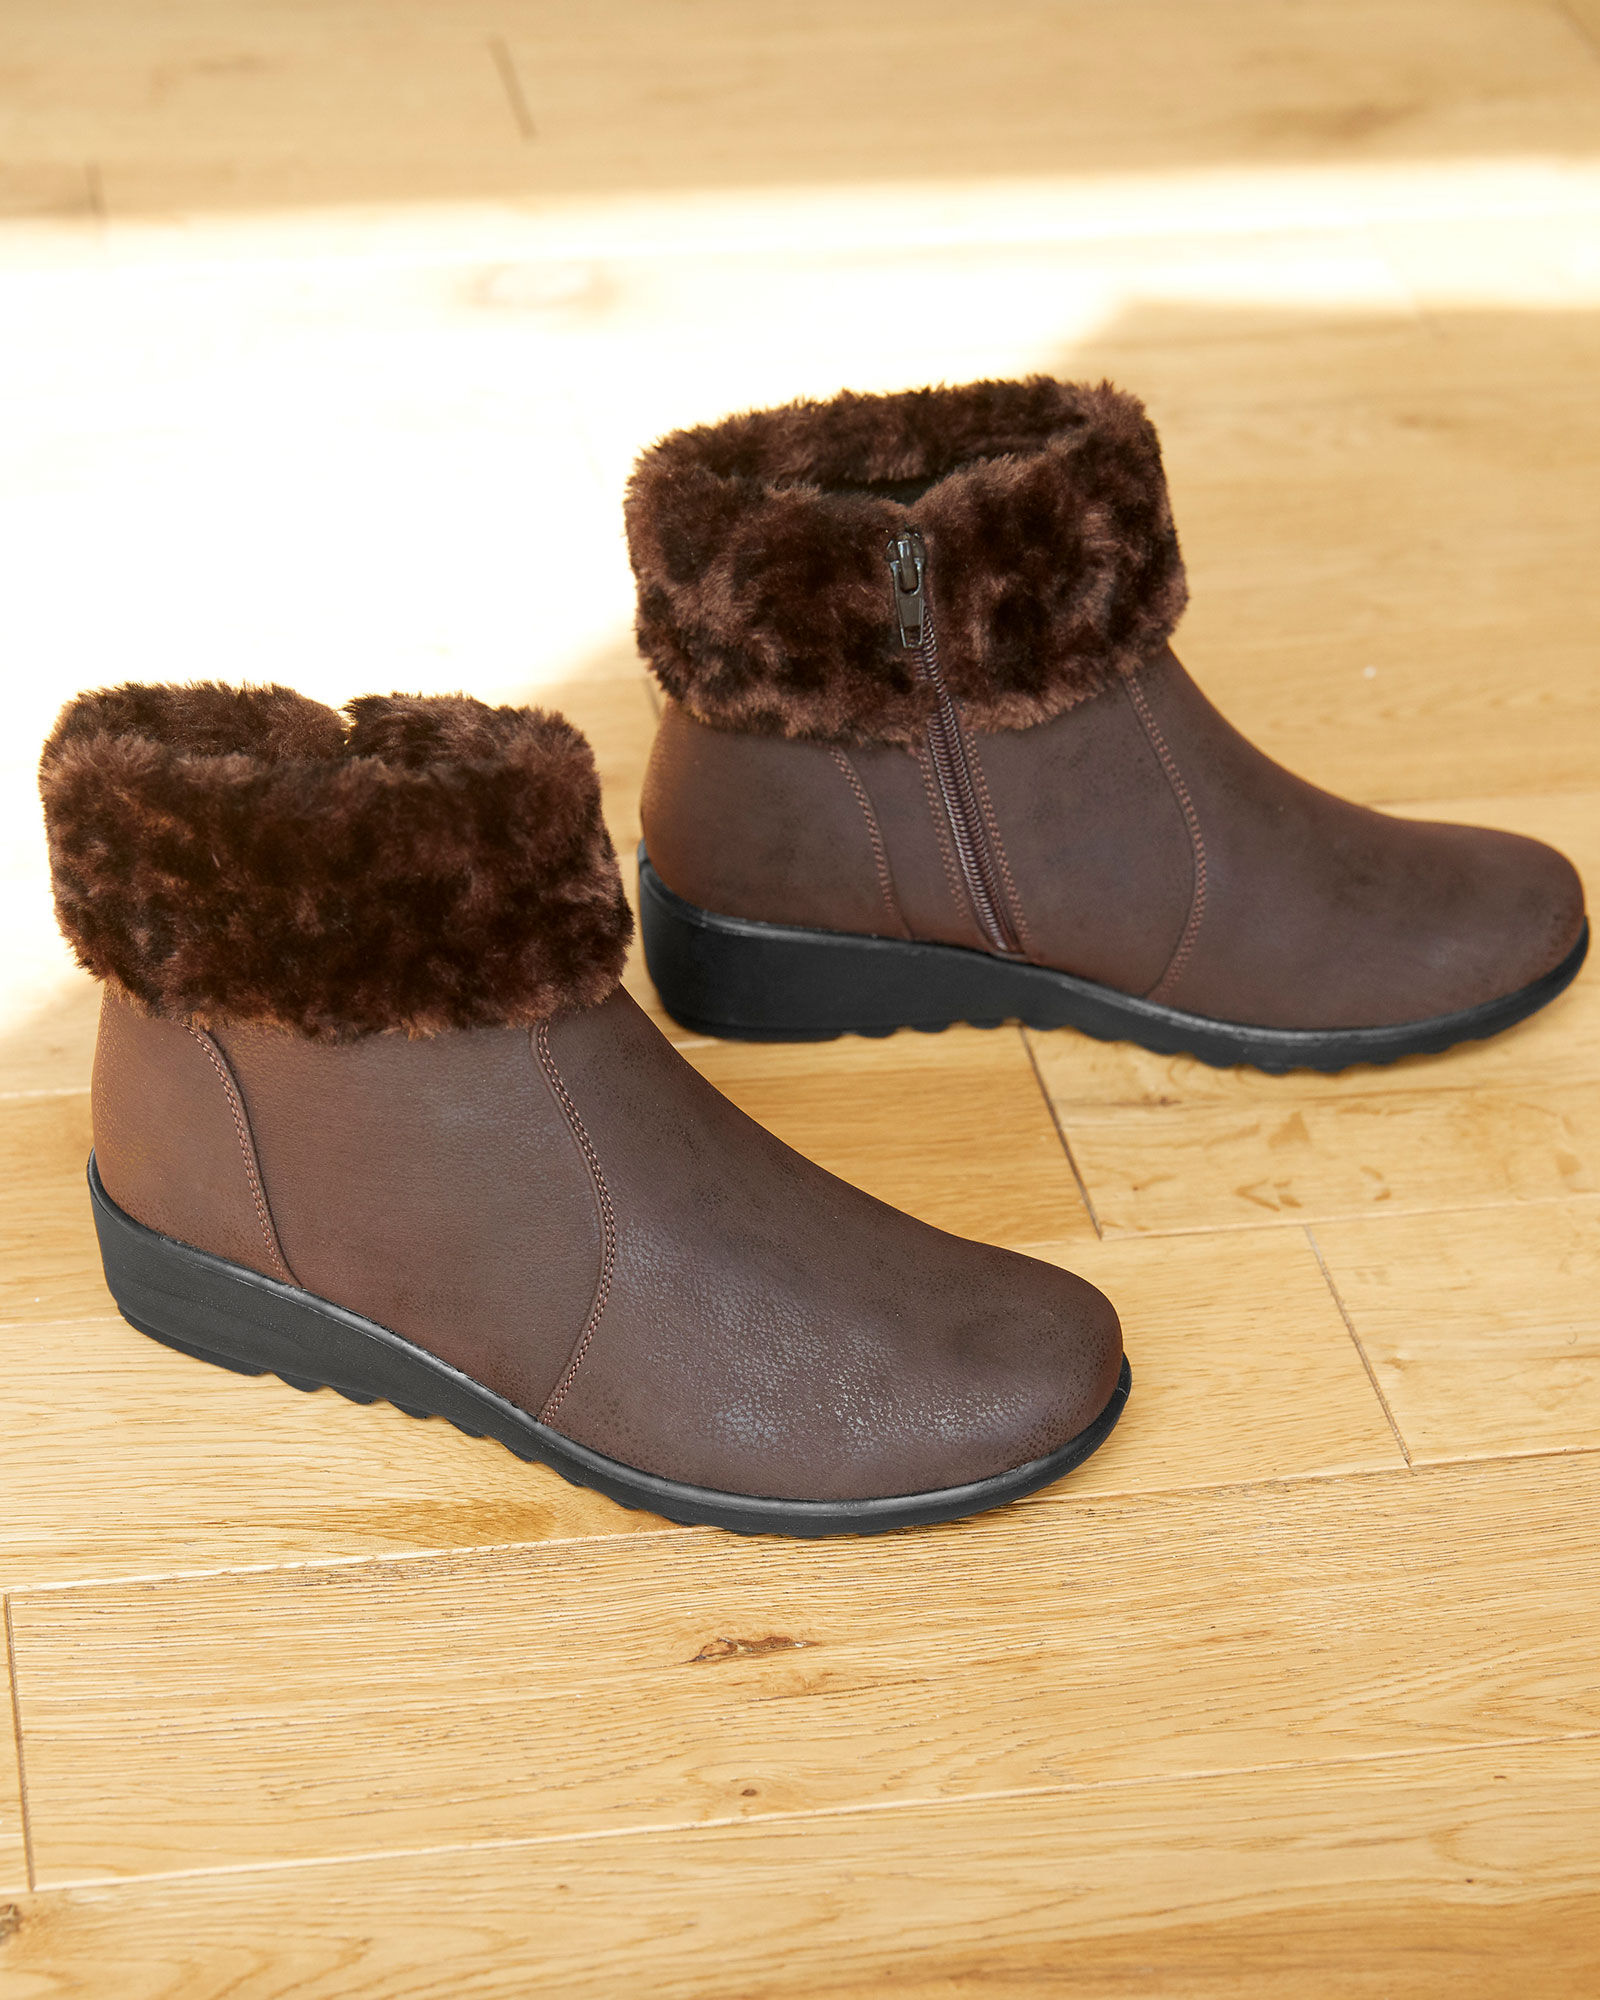 cotton traders wilderness boots